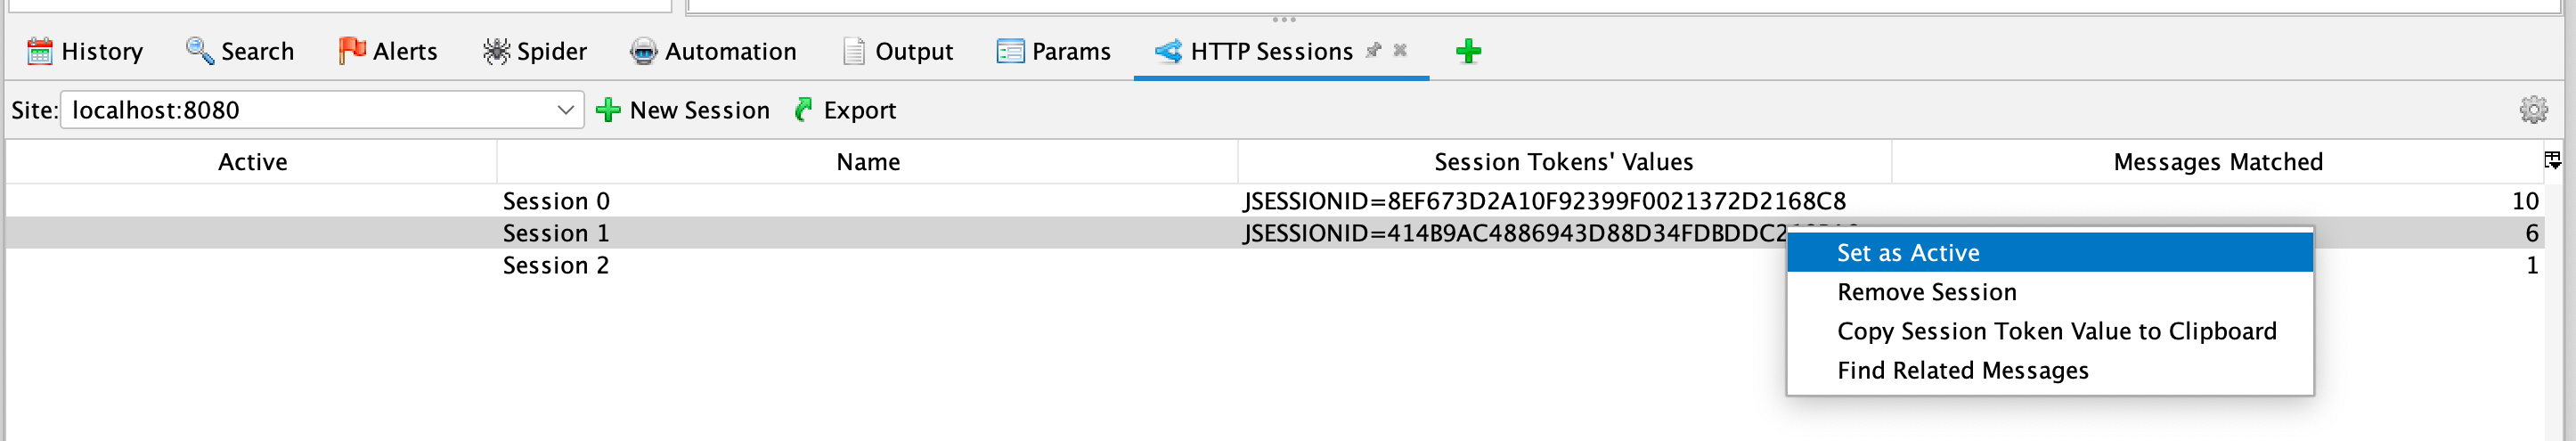 ZAP HTTP Sessions tab